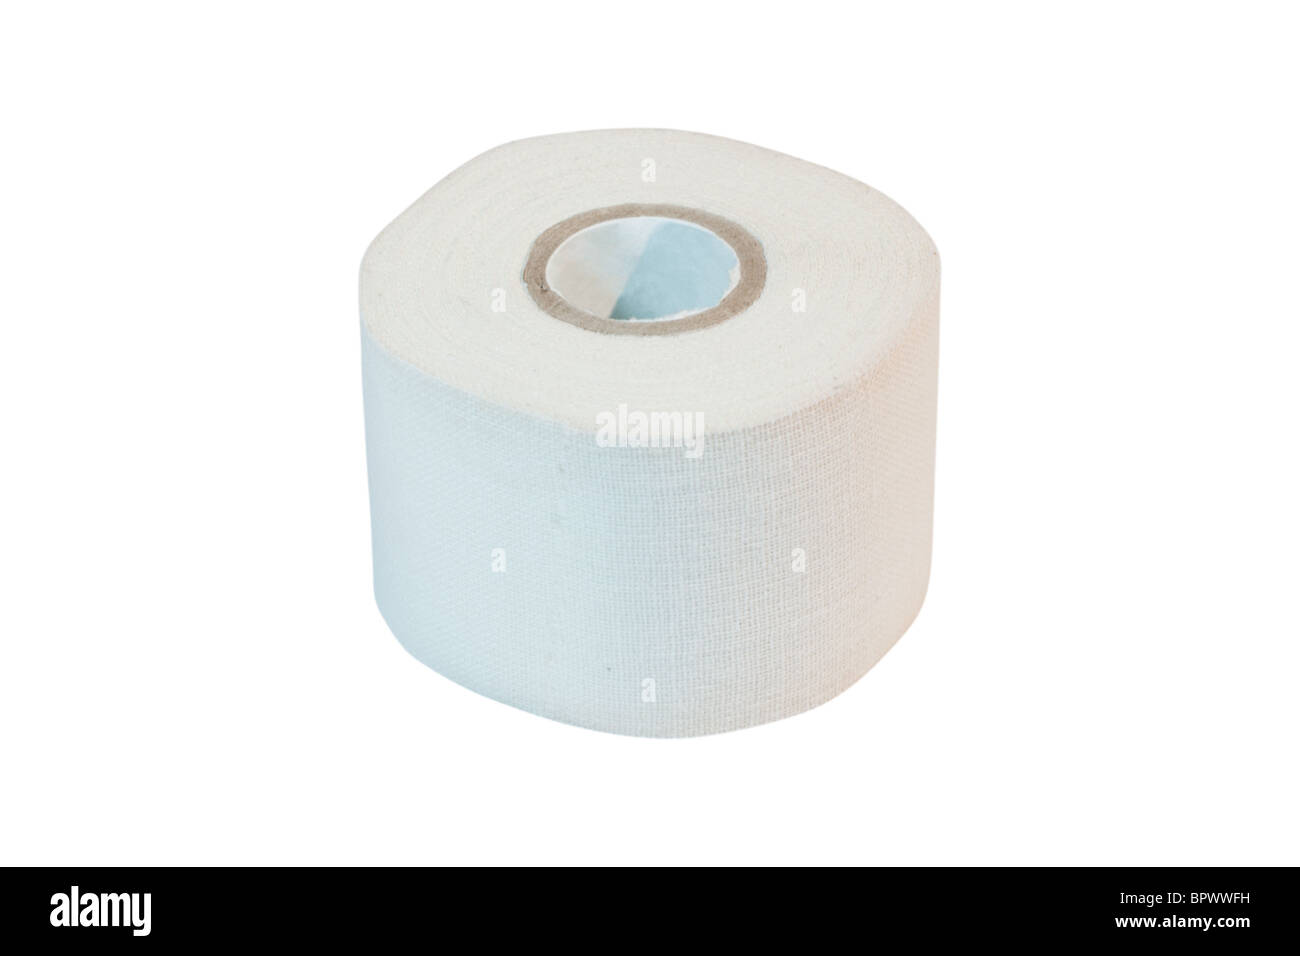 Adhesive bandage (sticking plaster) roll. Isolated on white background with clipping path. Stock Photo